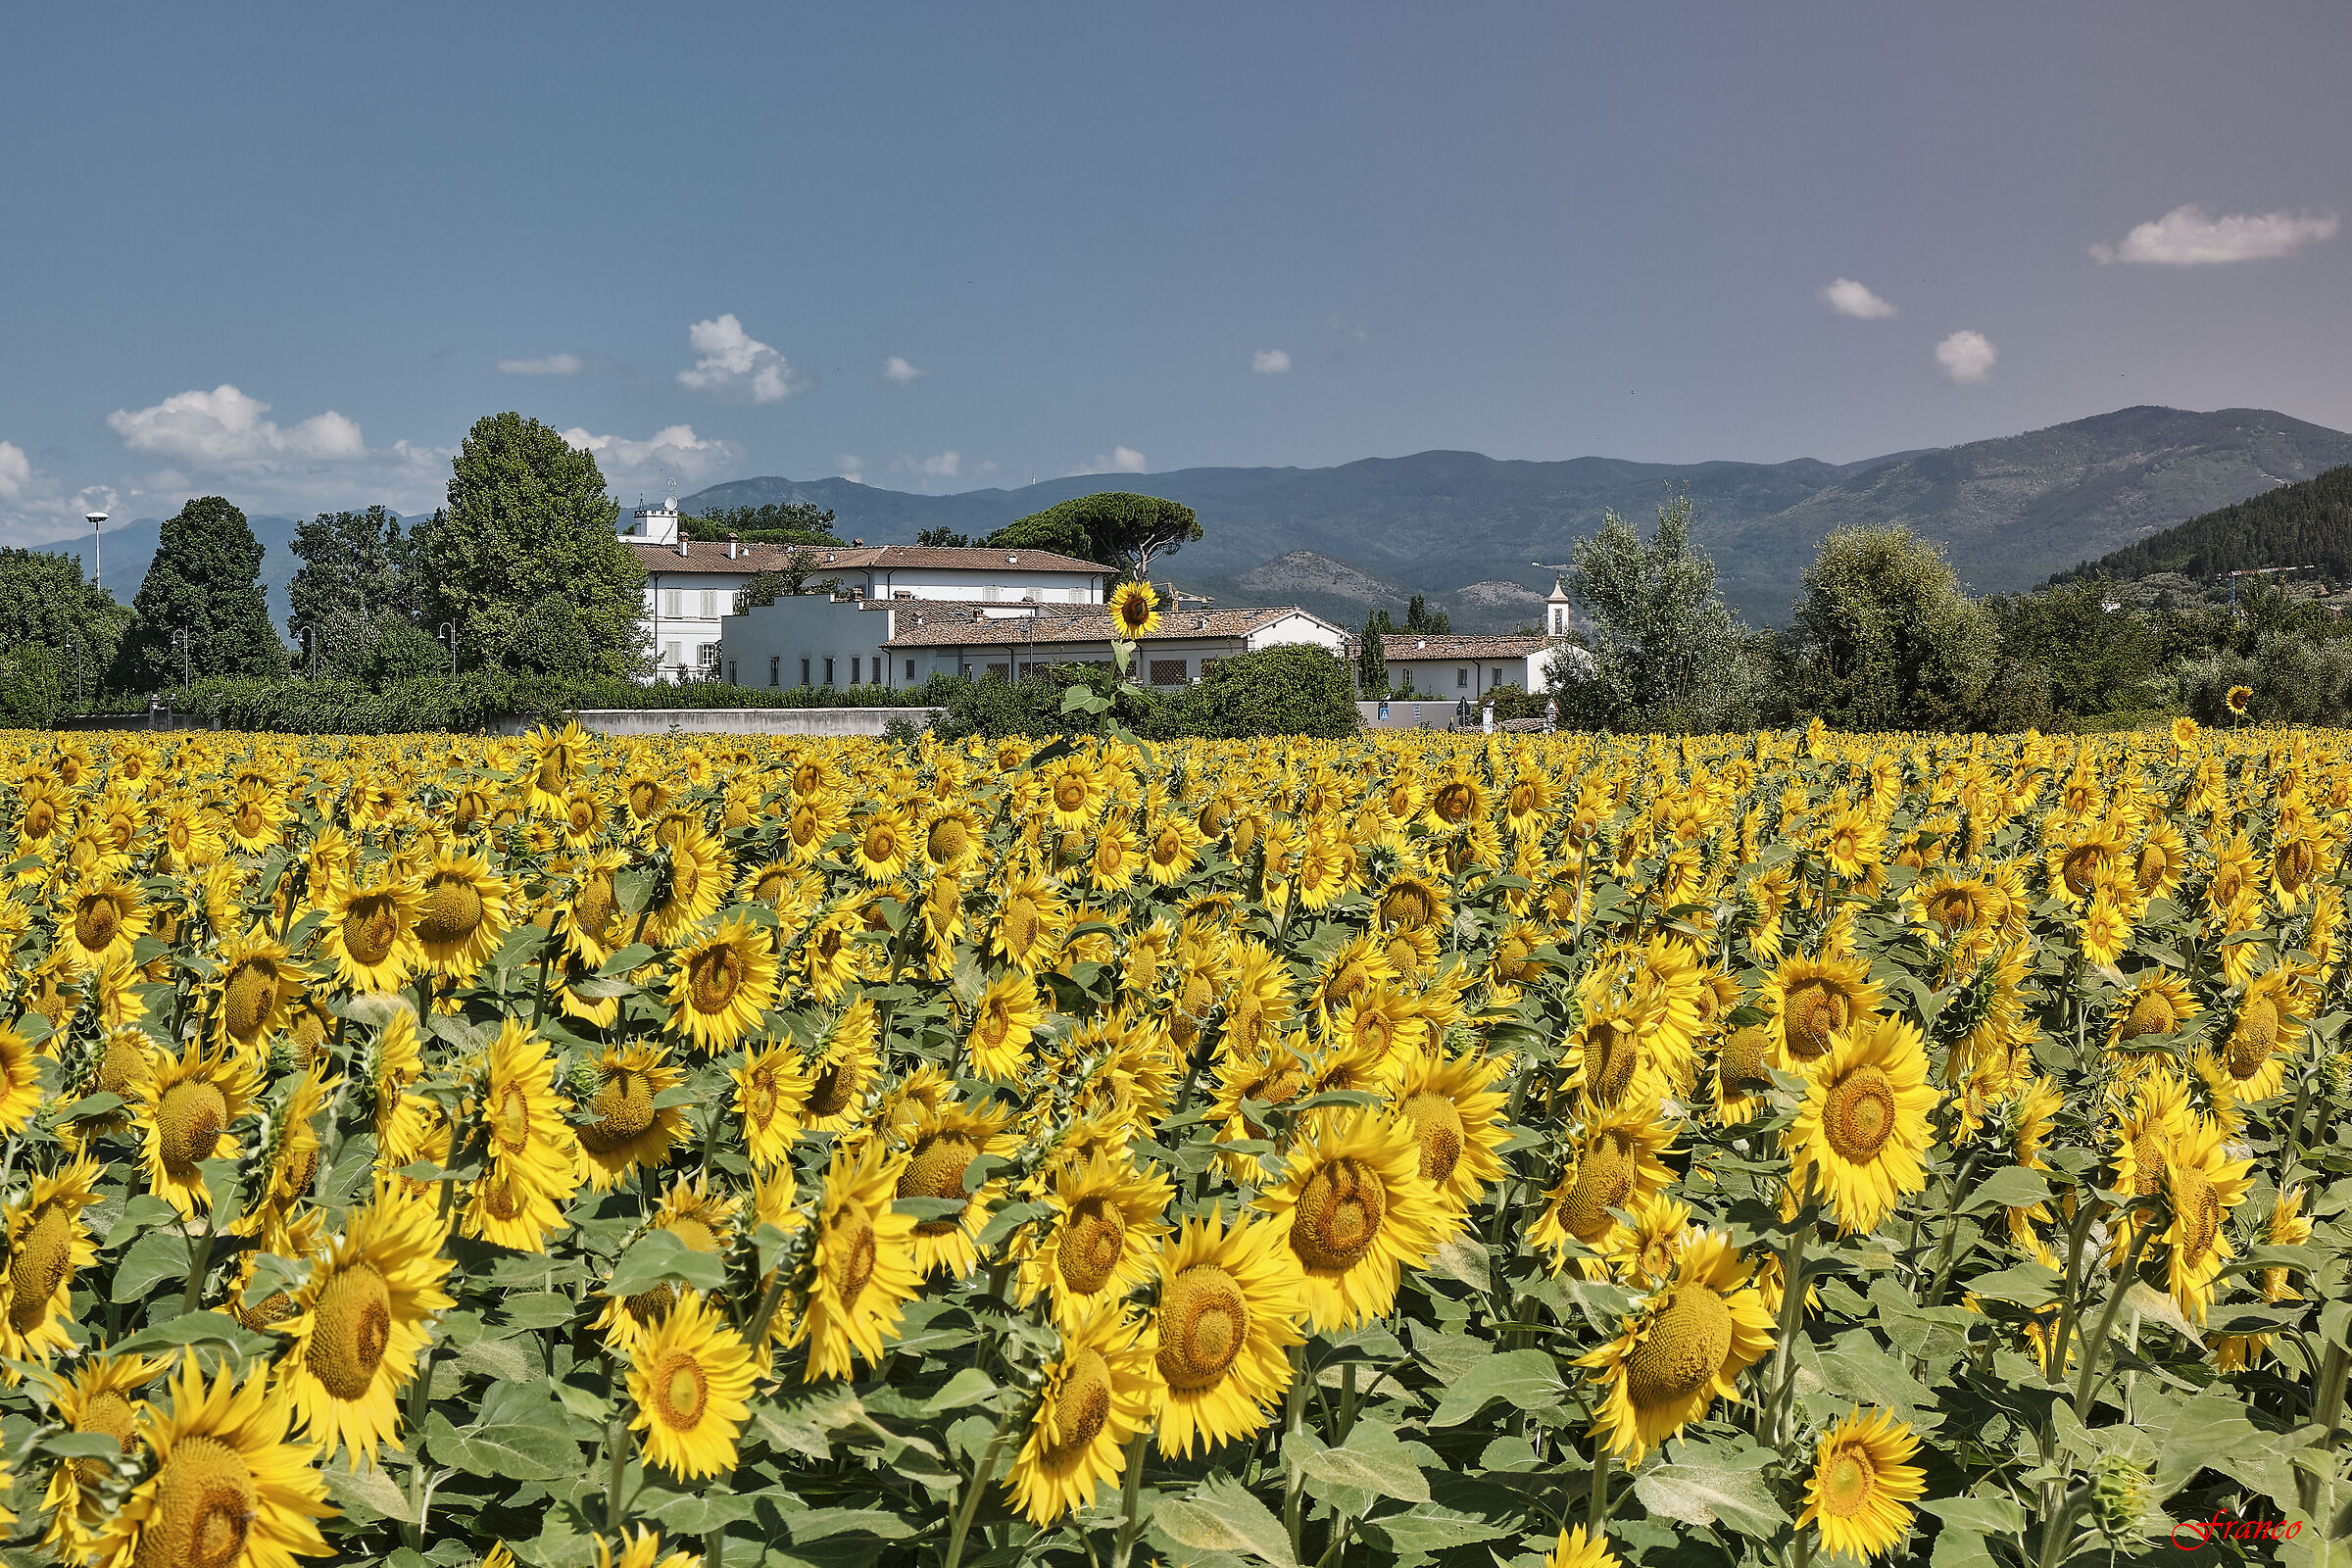 The sunflowers of Gonfienti #1...